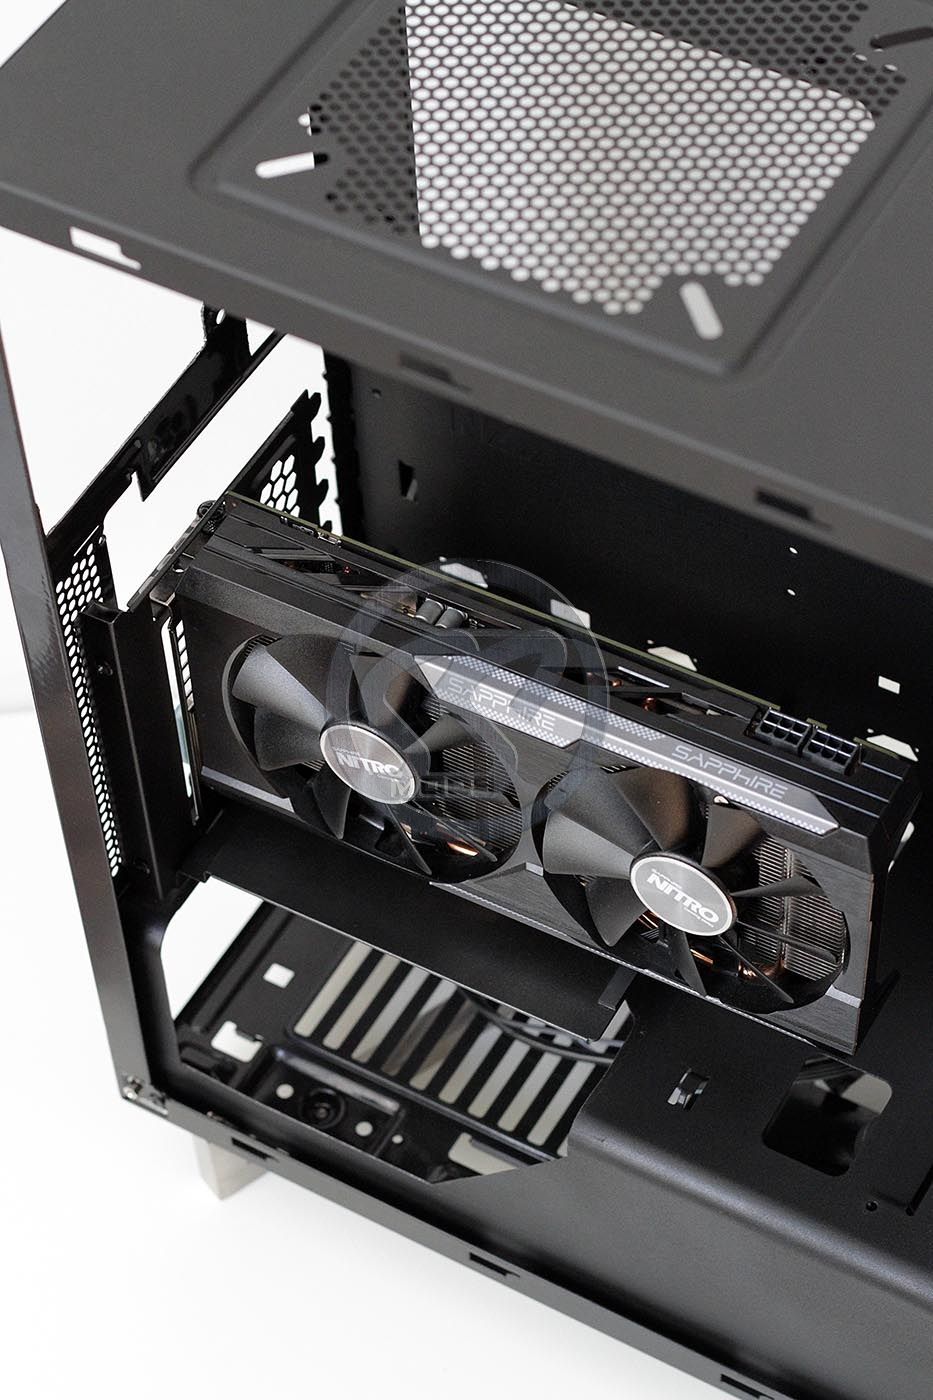 NZXT-by-SS-66